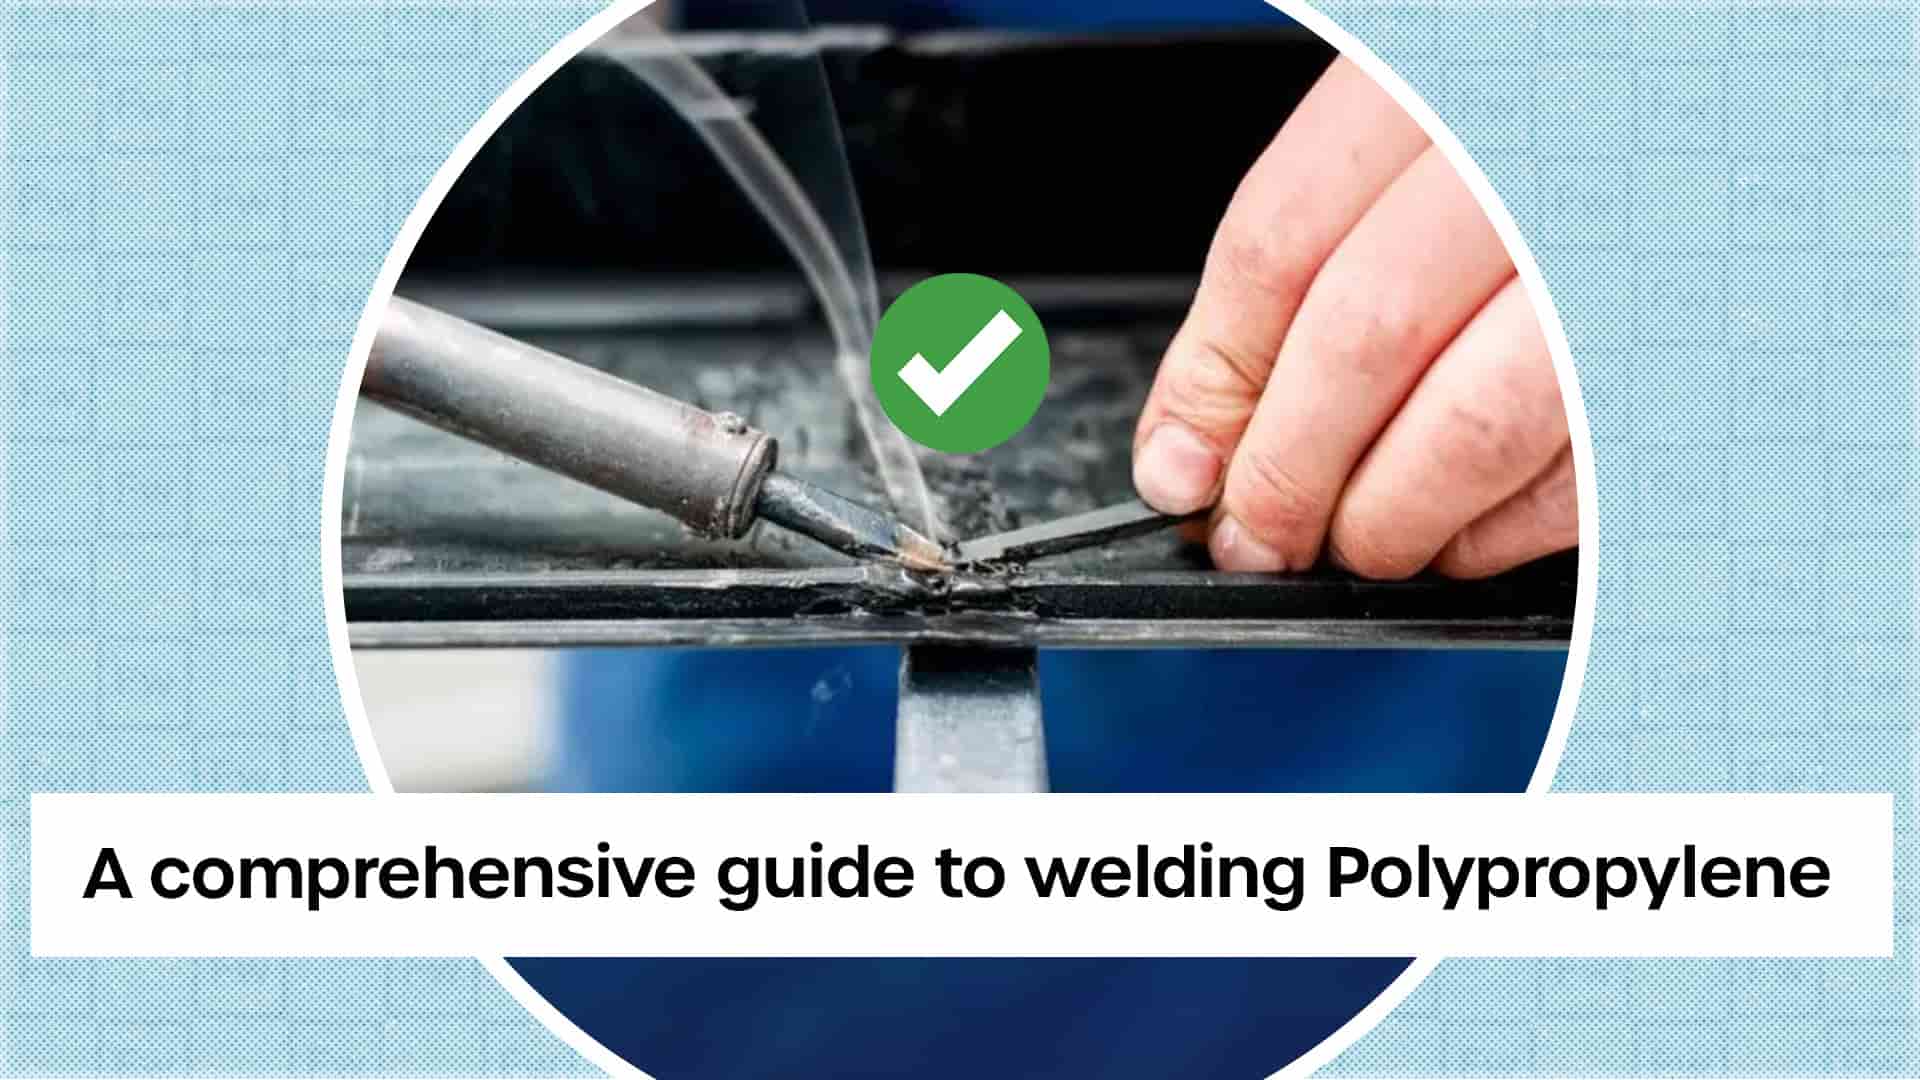 Is Welding Polypropylene the best method of joining?